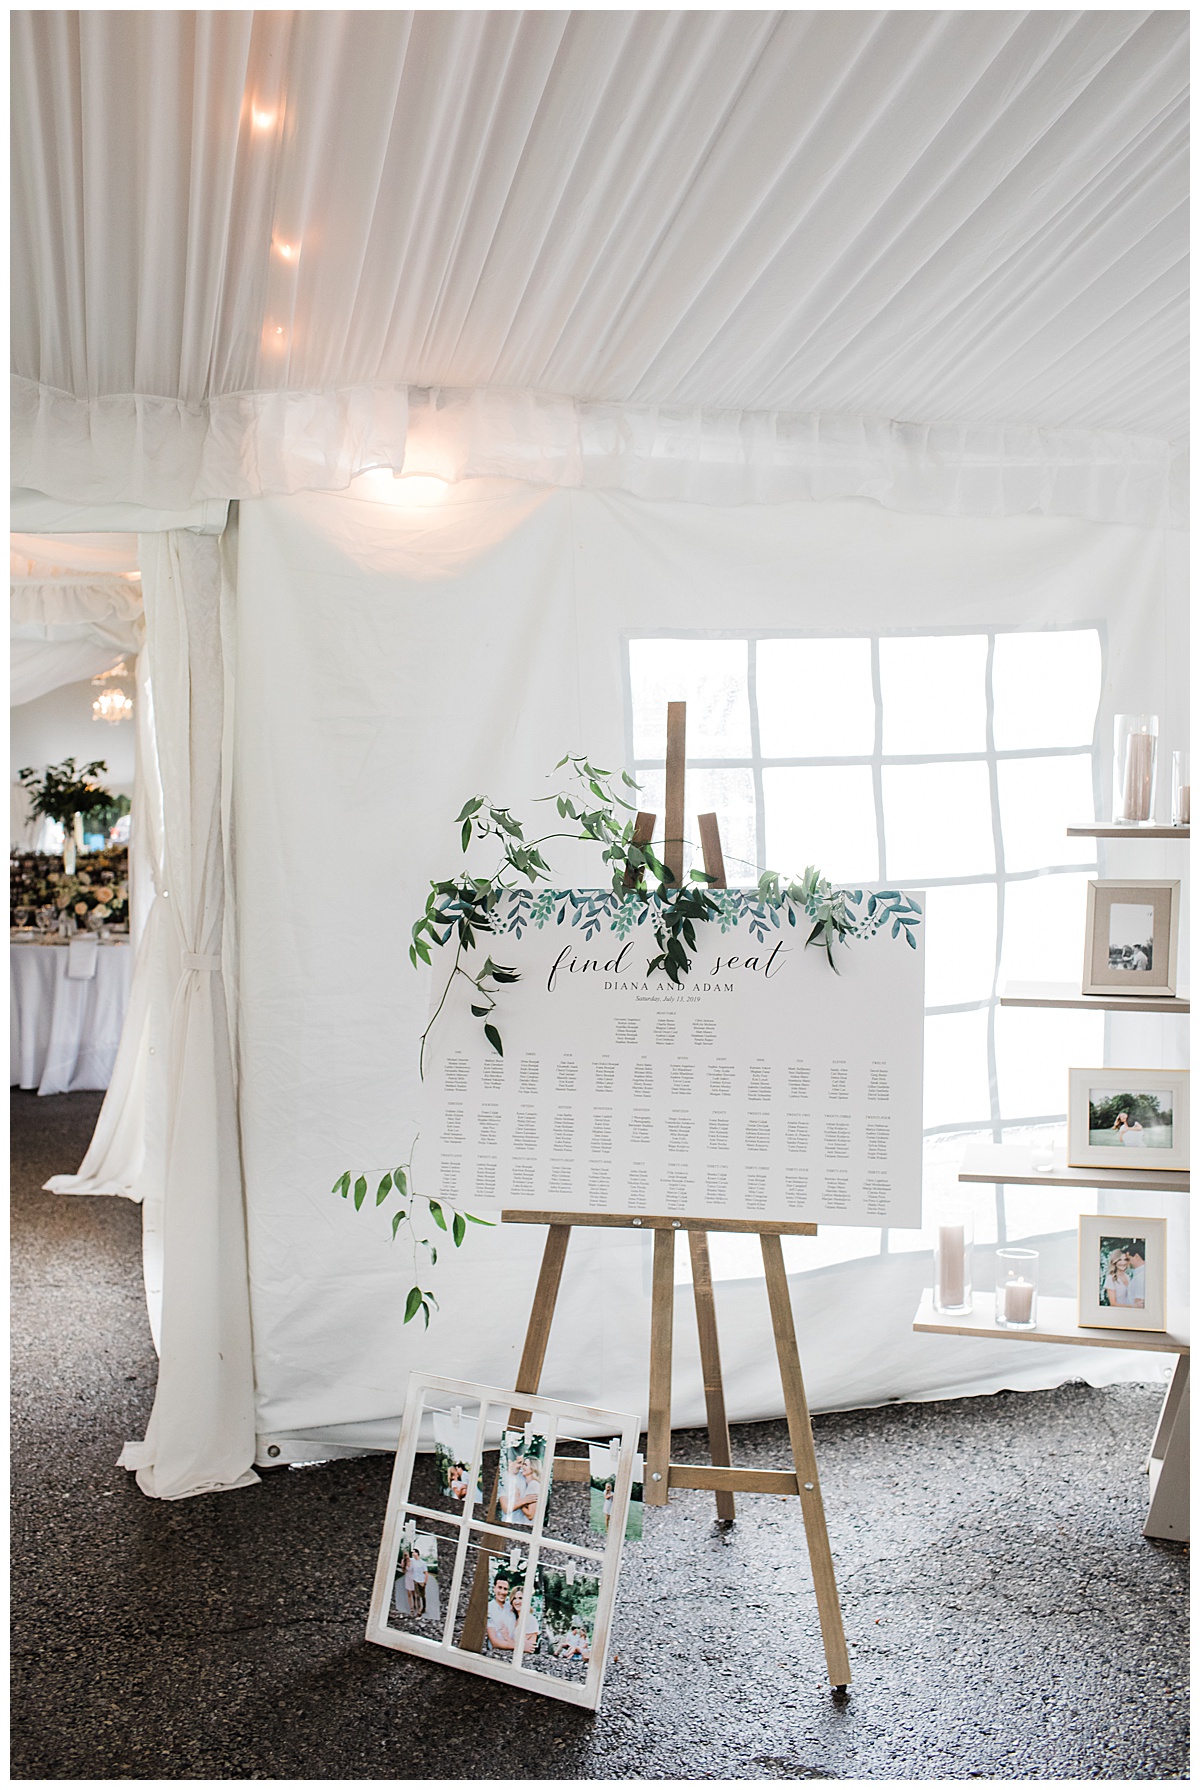 Find your seat sign at Ontario wedding| 3photography